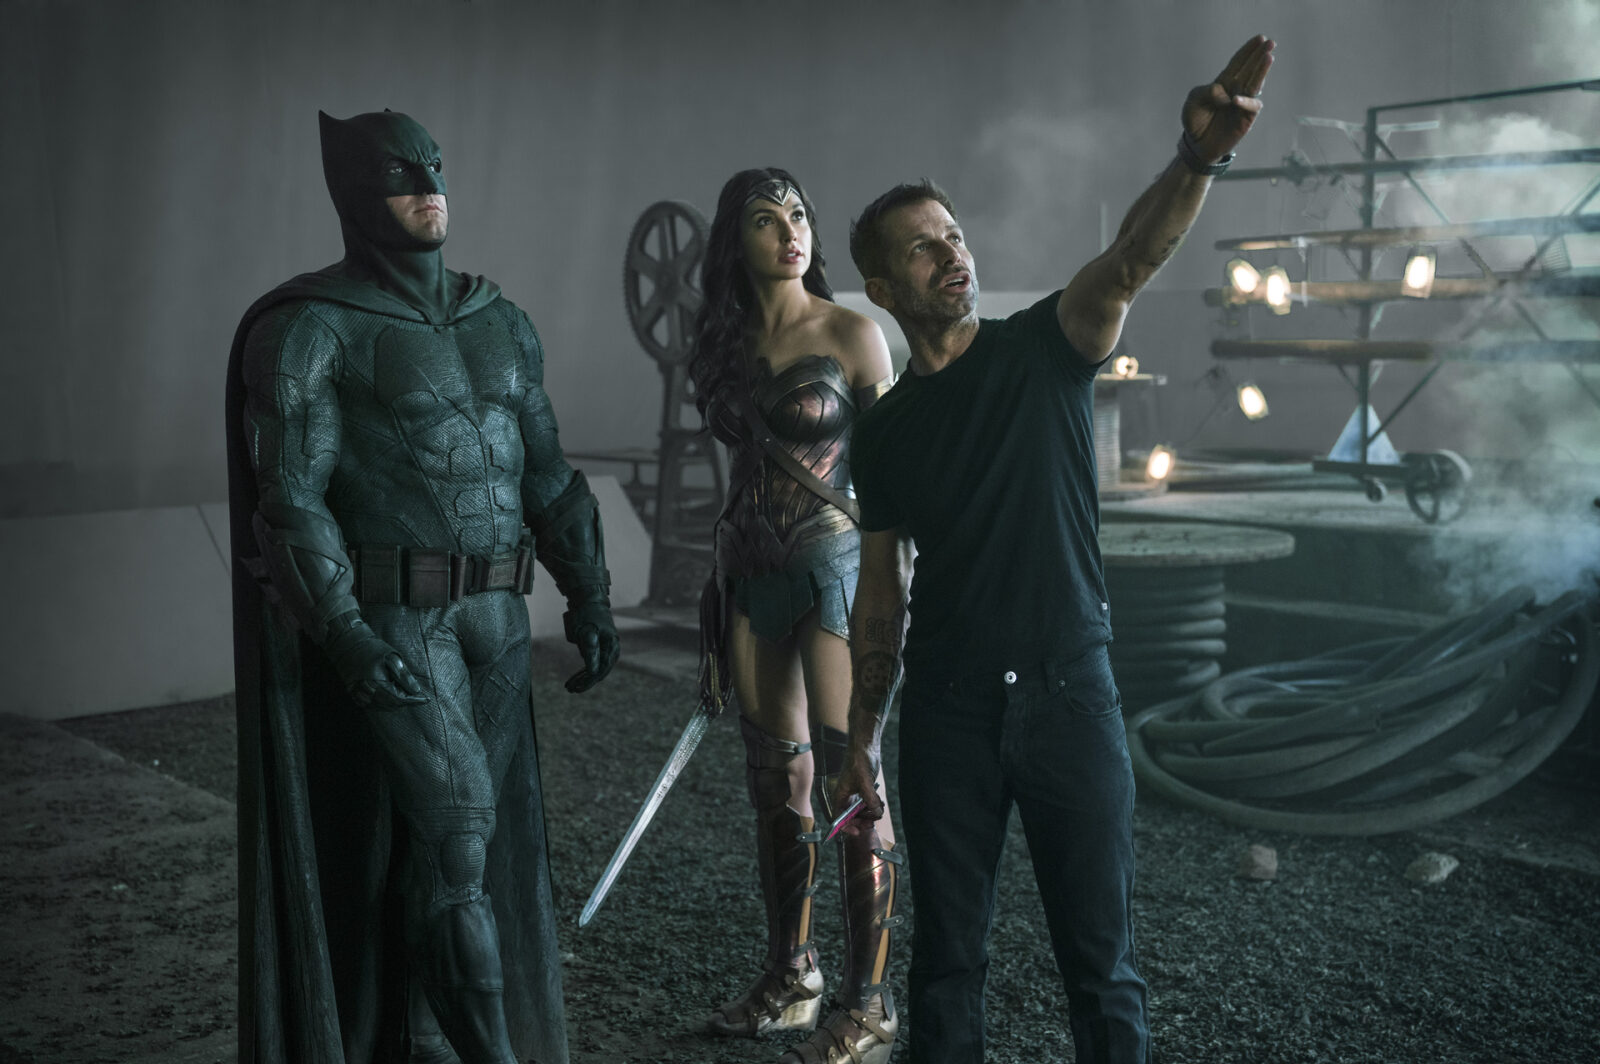 Will Warner Bros. restore the #SnyderVerse? See how Zack Snyder's Justice League performed